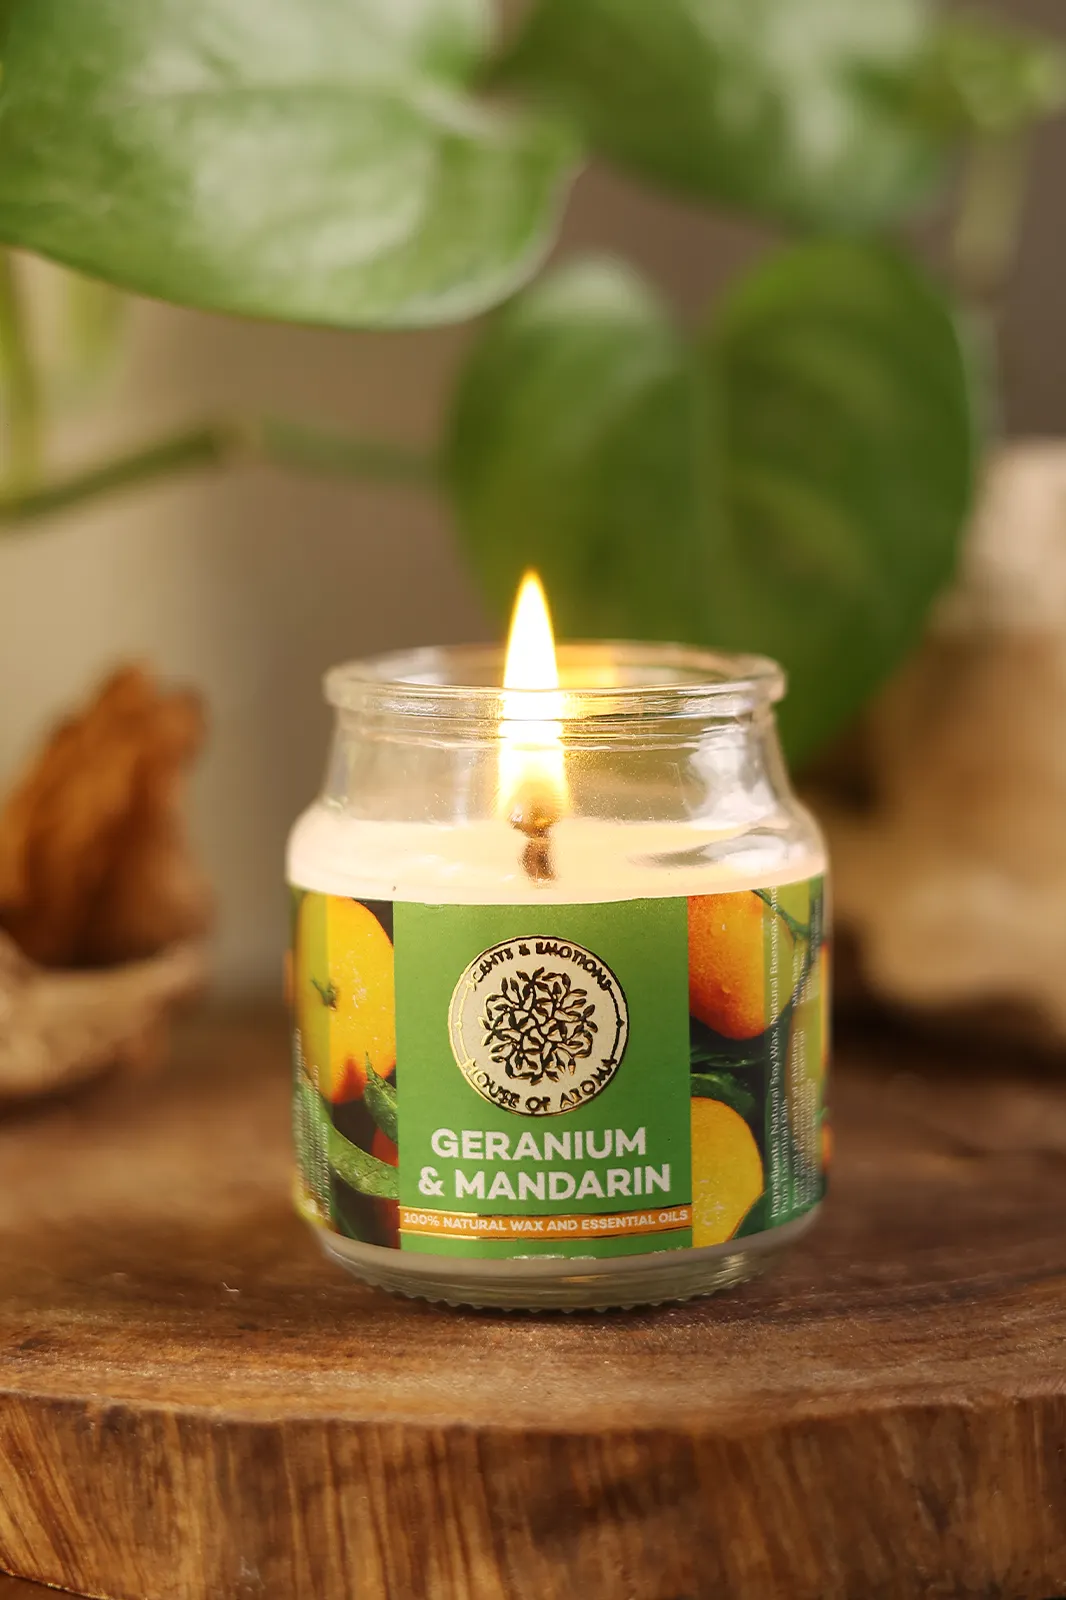 Geranium & Mandarin Natural Scented Candle, Geranium Mandarin candles, geranium soy wax candle, mandarin candles, luxury scented candles India, essential oil, House of Aroma